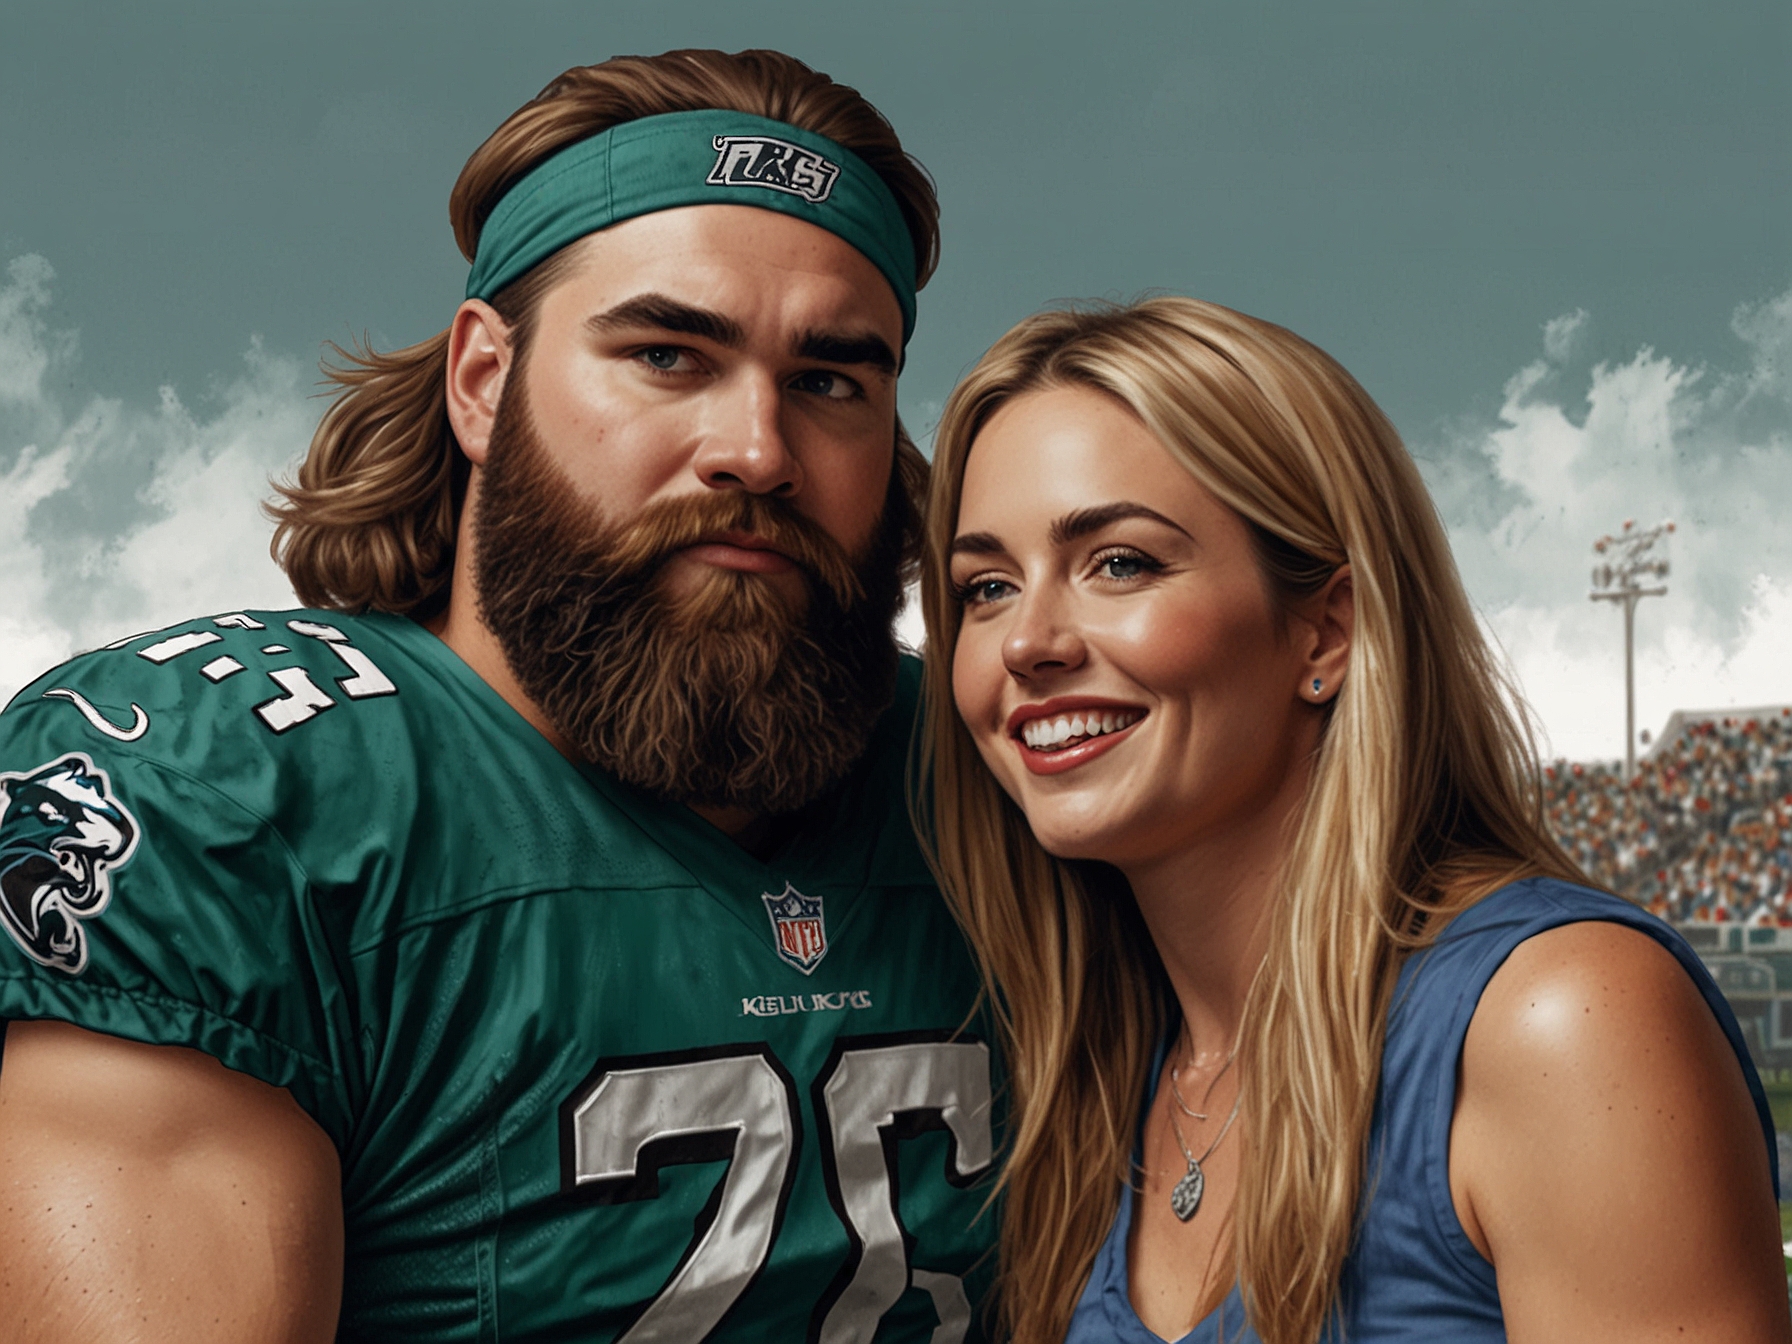 Jason Kelce and his wife Kylie in a candid moment, discussing their decision to scale back on social media sharing to protect their children's privacy.